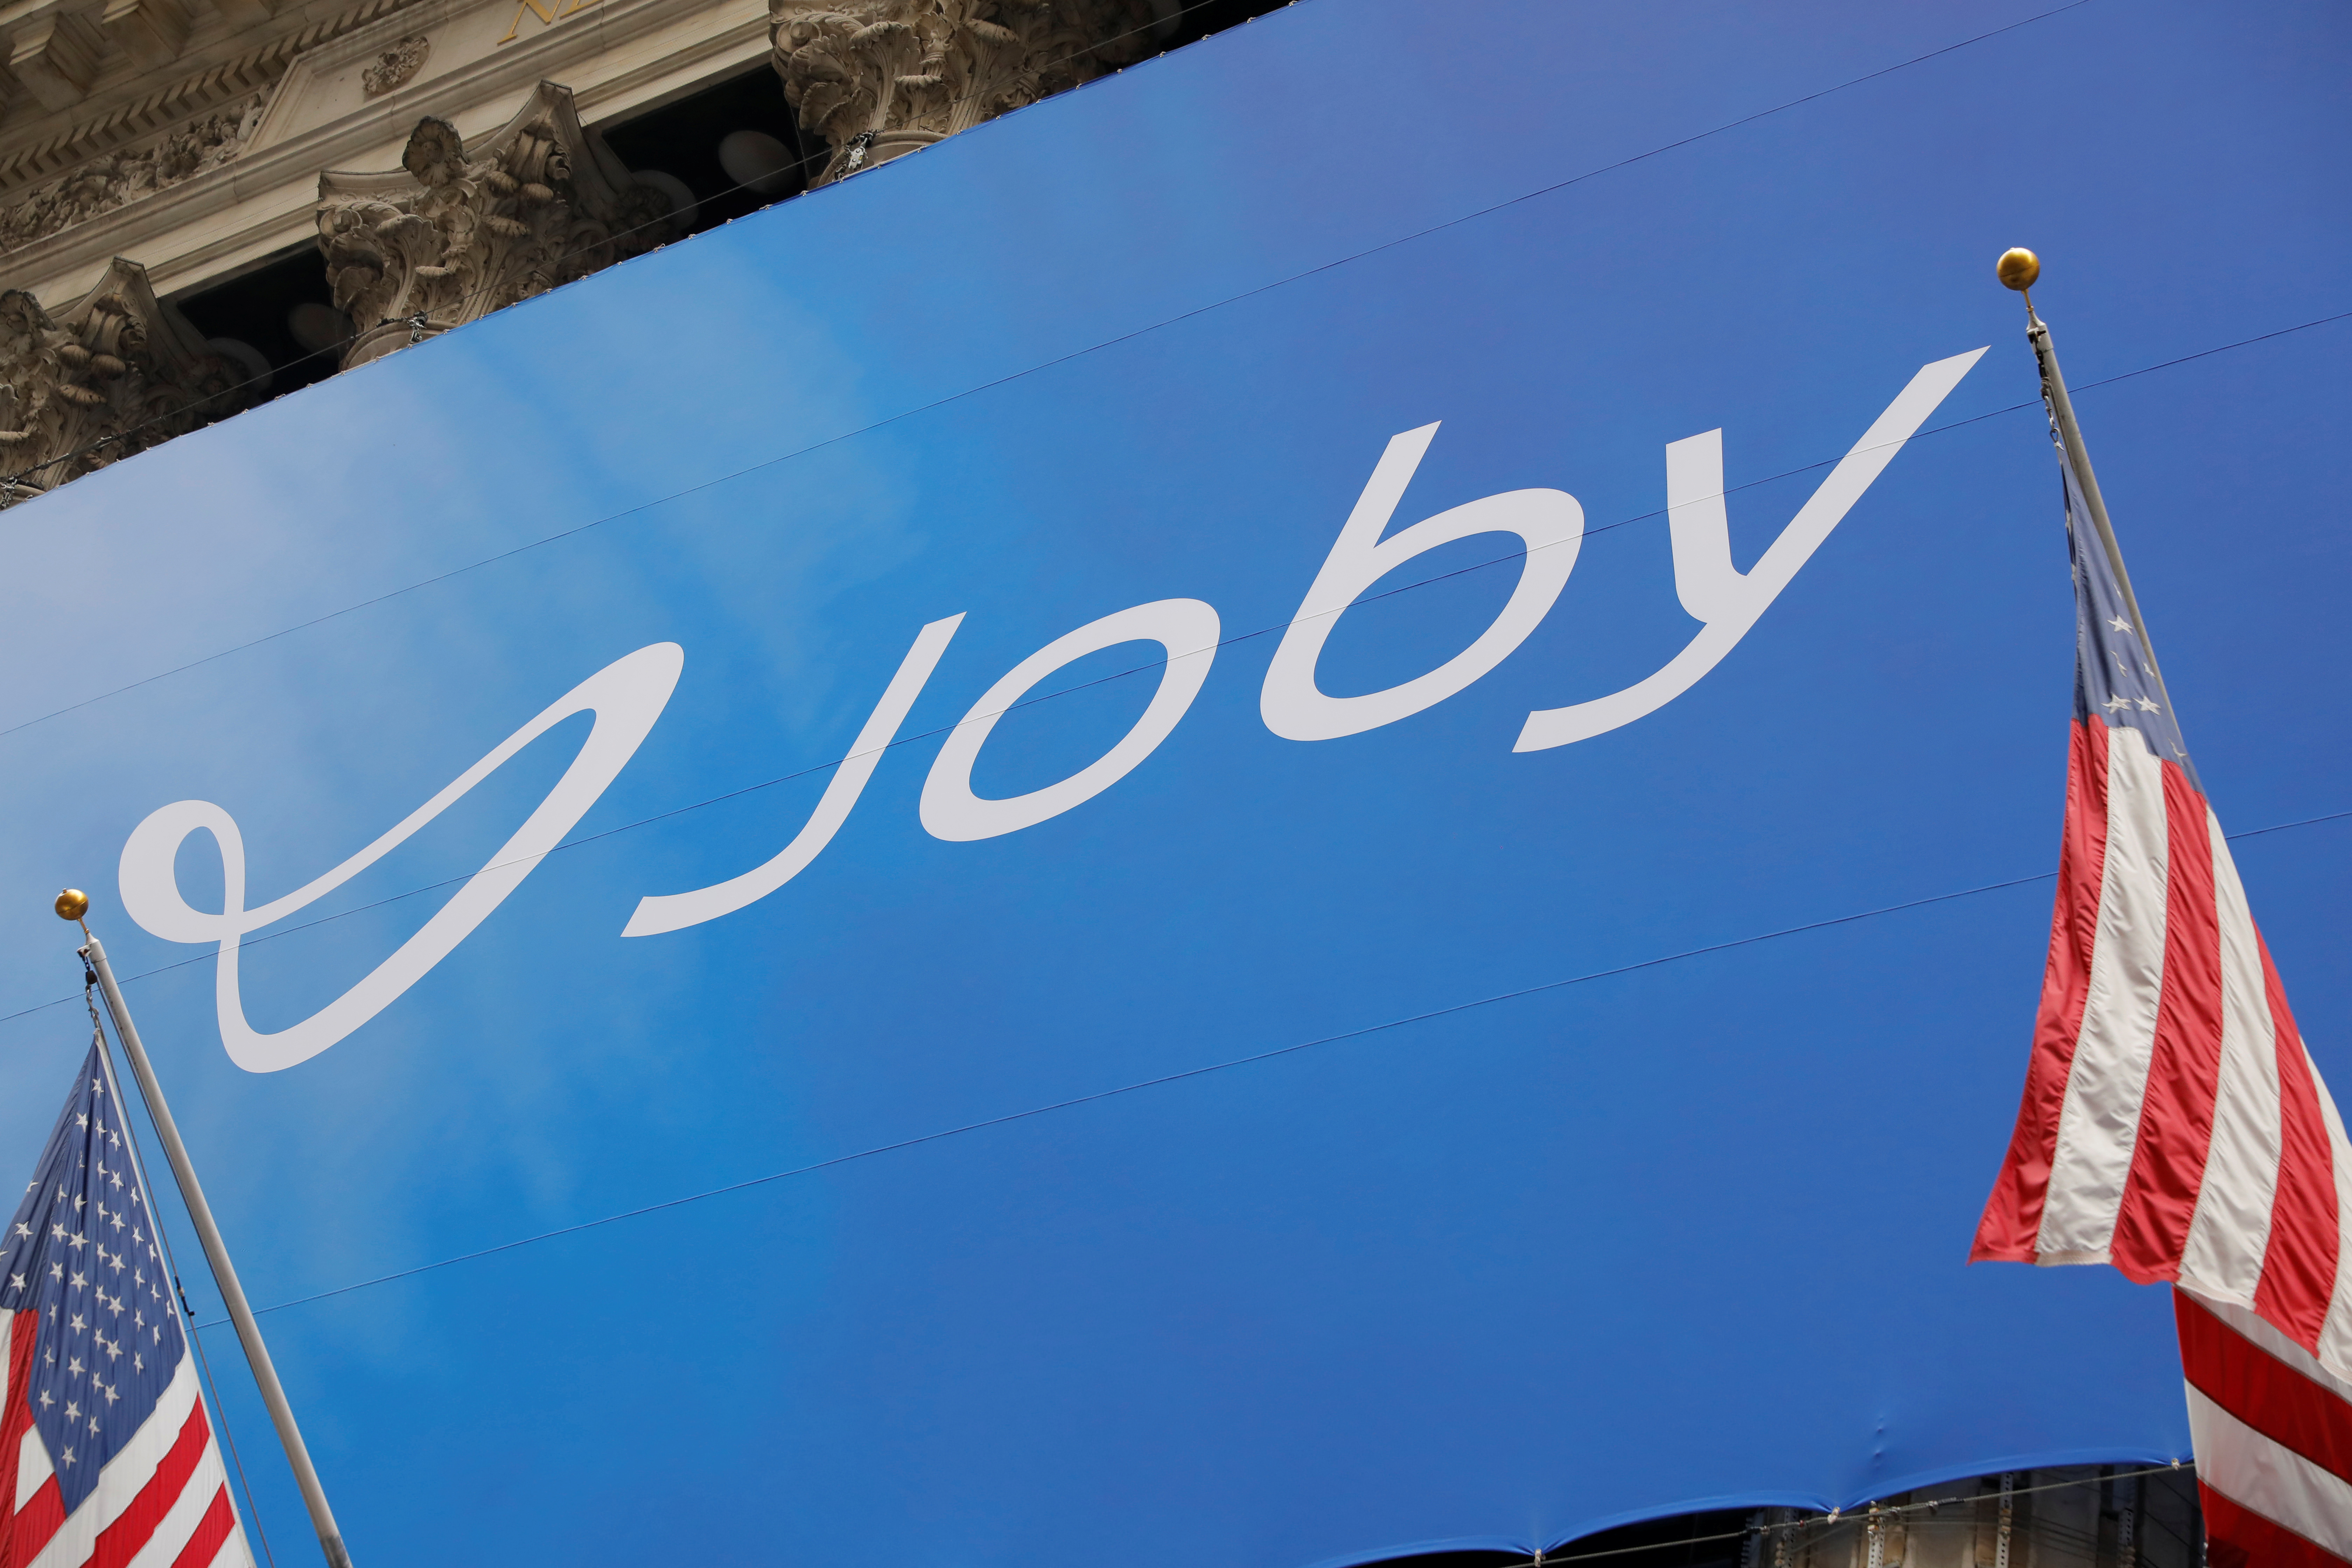 The Joby Aviation logo is seen outside of the New York Stock Exchange (NYSE) ahead of their listing in Manhattan, New York City